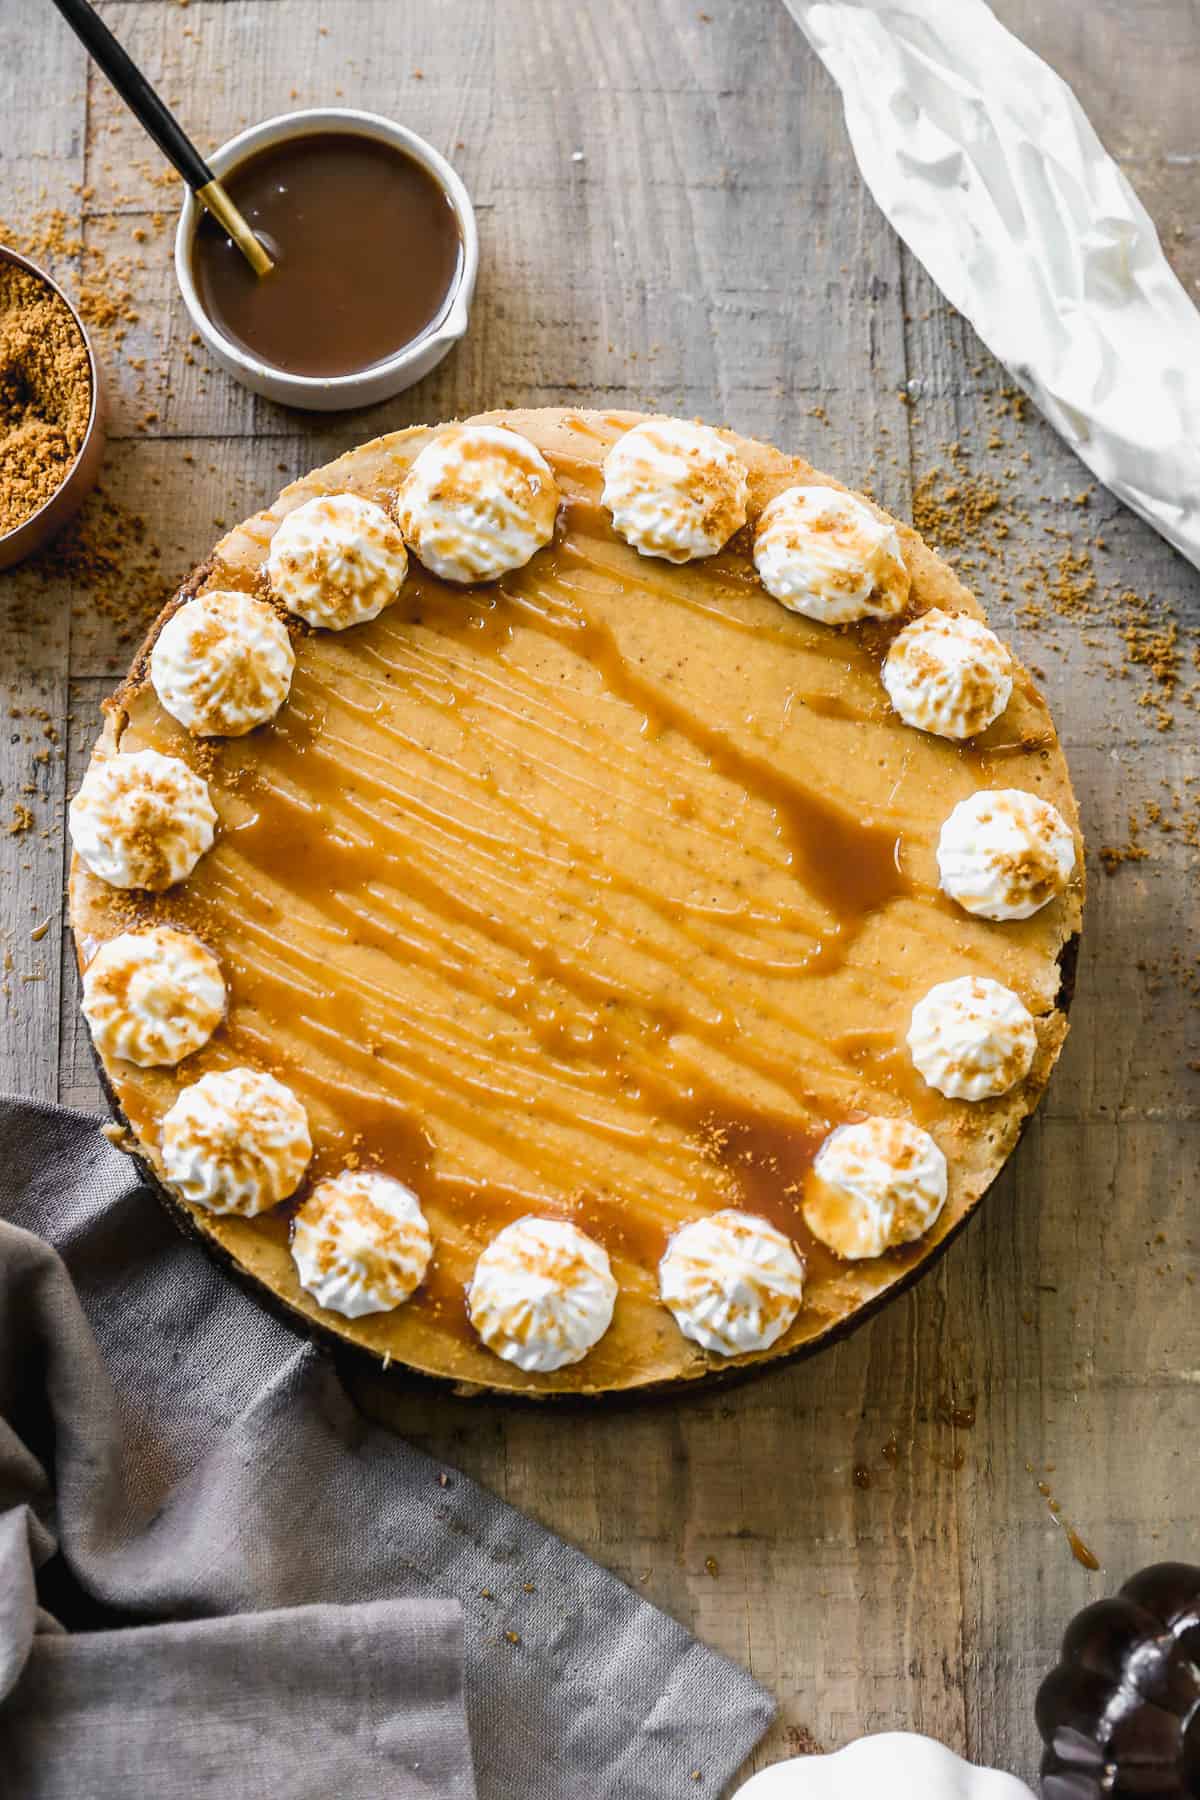 A homemade Pumpkin Cheesecake decorated with piped whipped cream and caramel sauce.